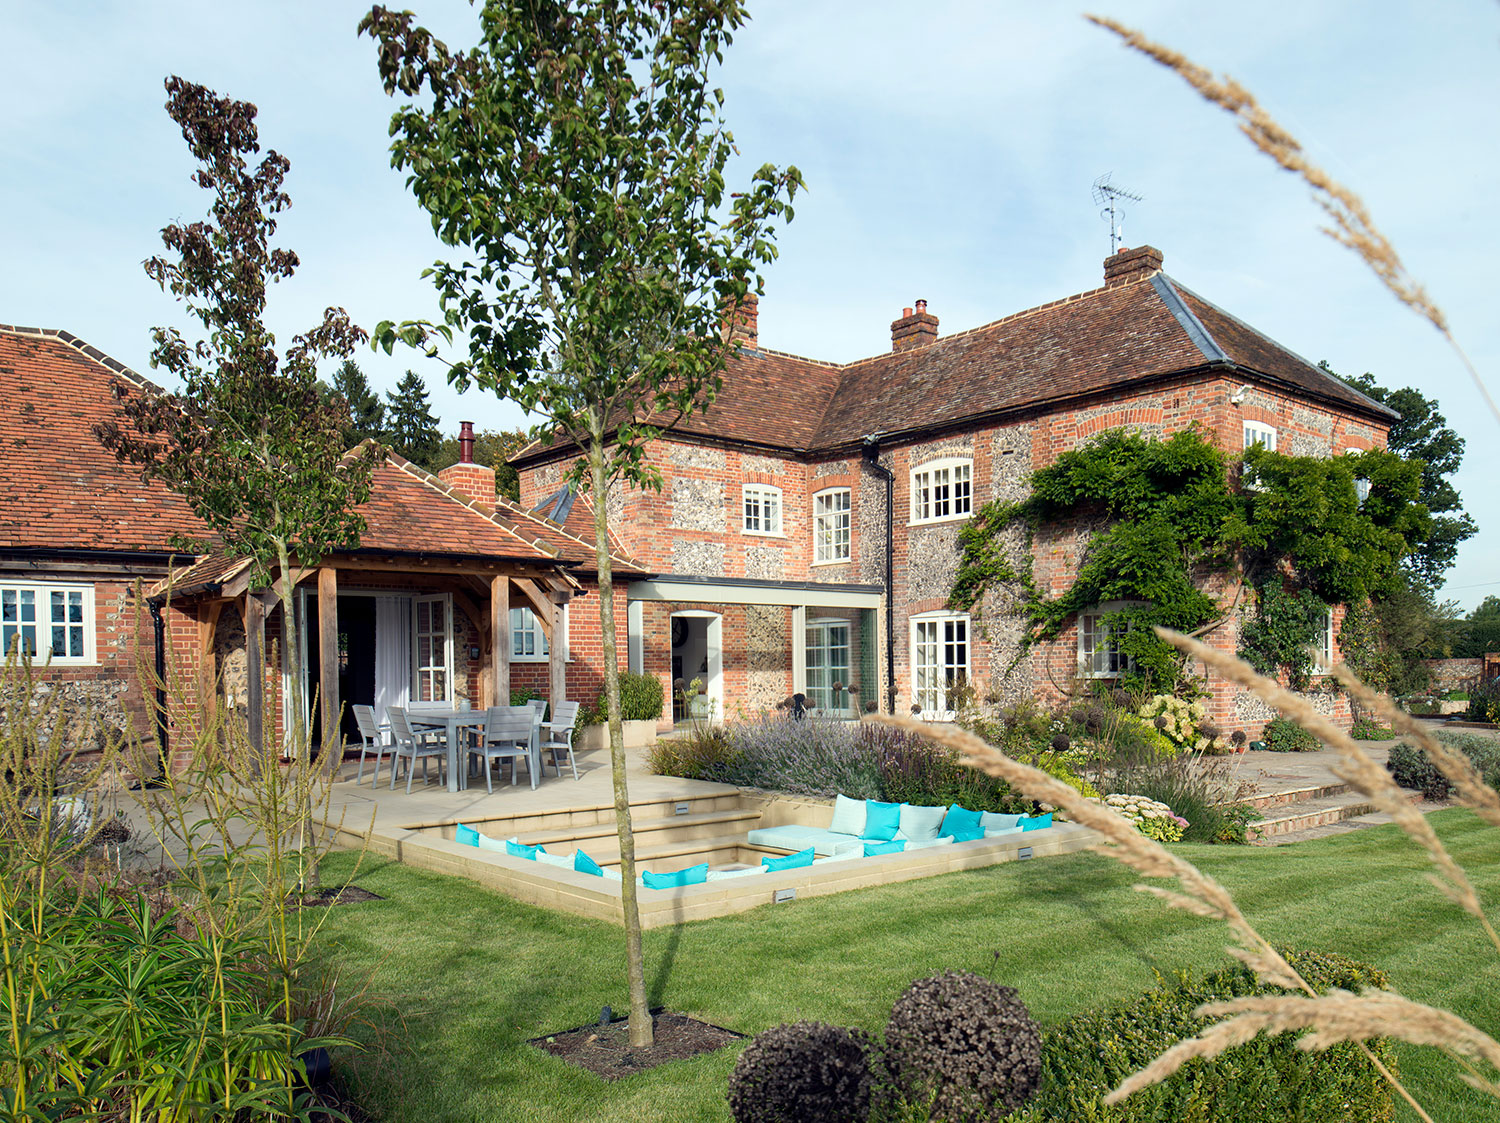 Exterior of luxury, high-end refurbished farmhouse in Oxfordshire